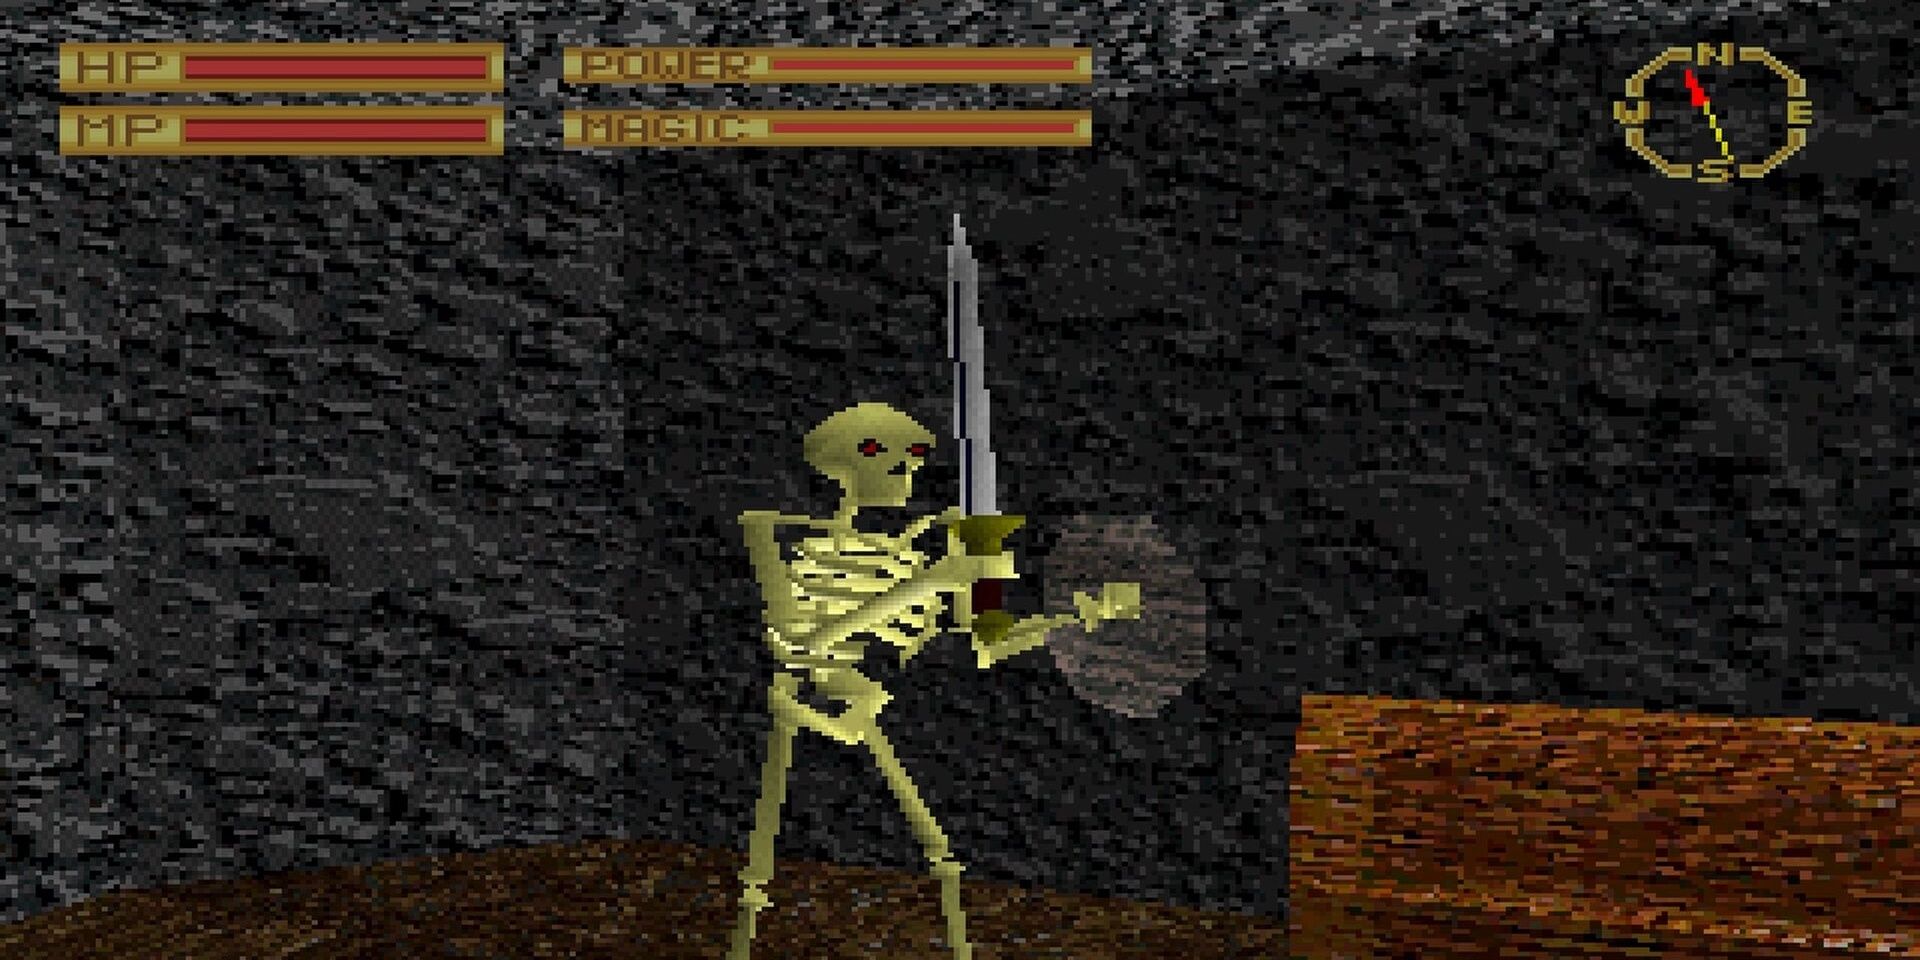 A skeleton holding a sword in King's Field